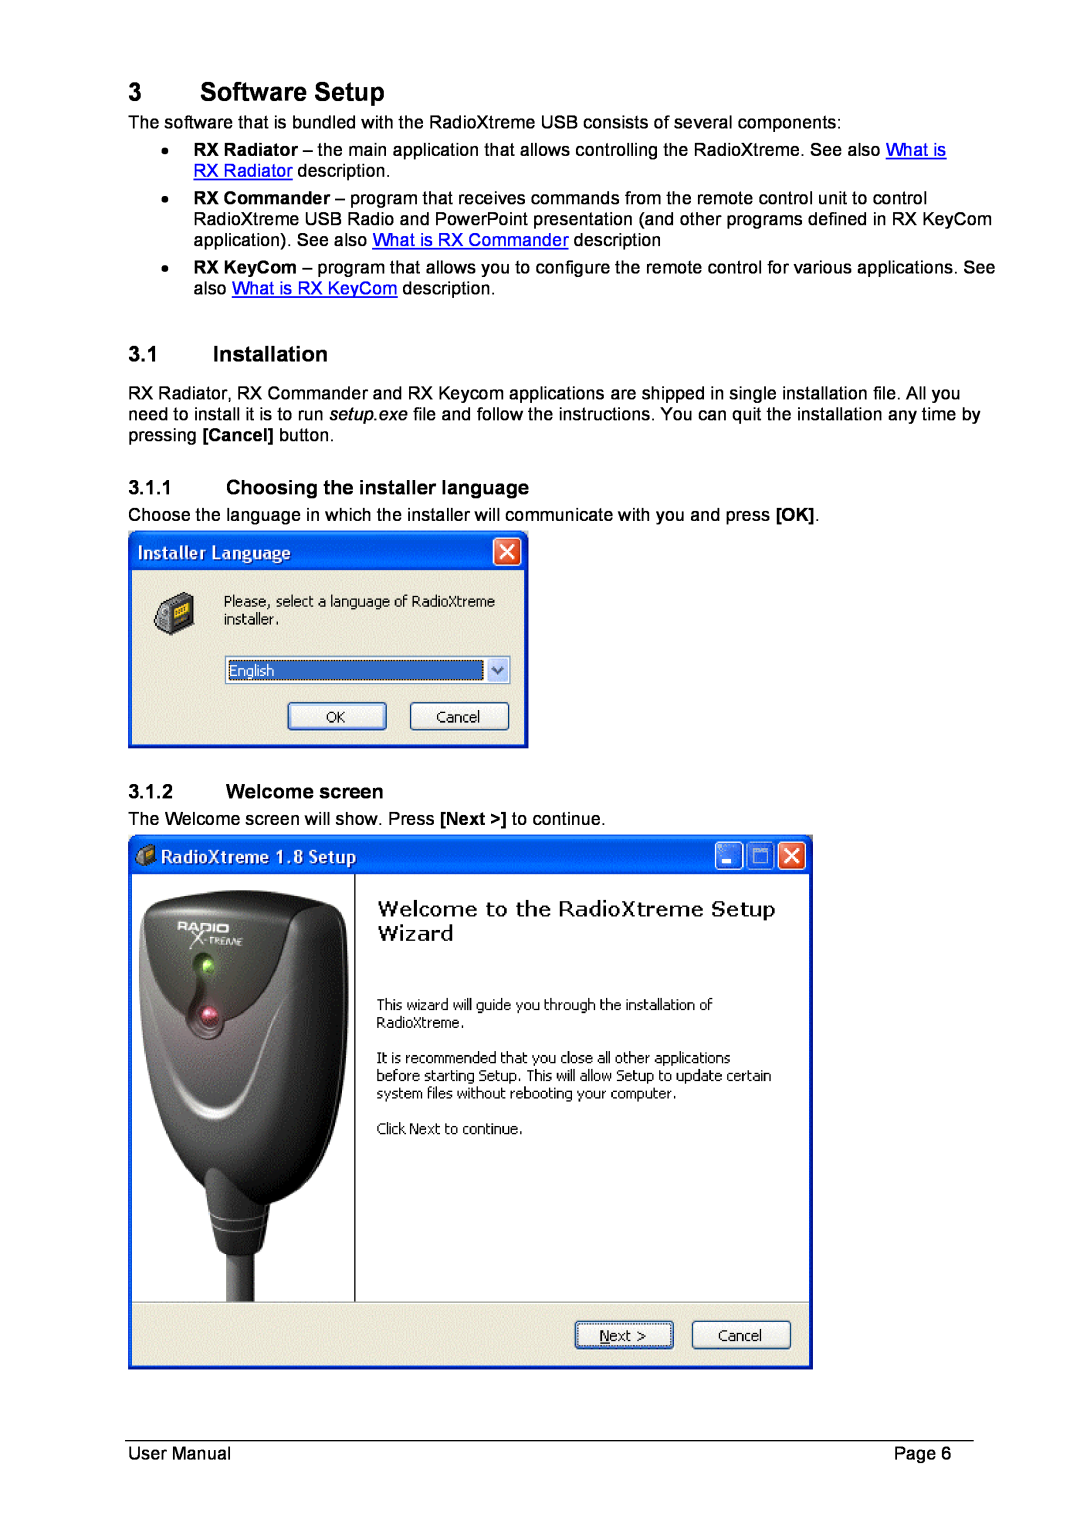 Philips FMU-100 user manual Software Setup, 3.1Installation, 3.1.1Choosing the installer language, 3.1.2Welcome screen 